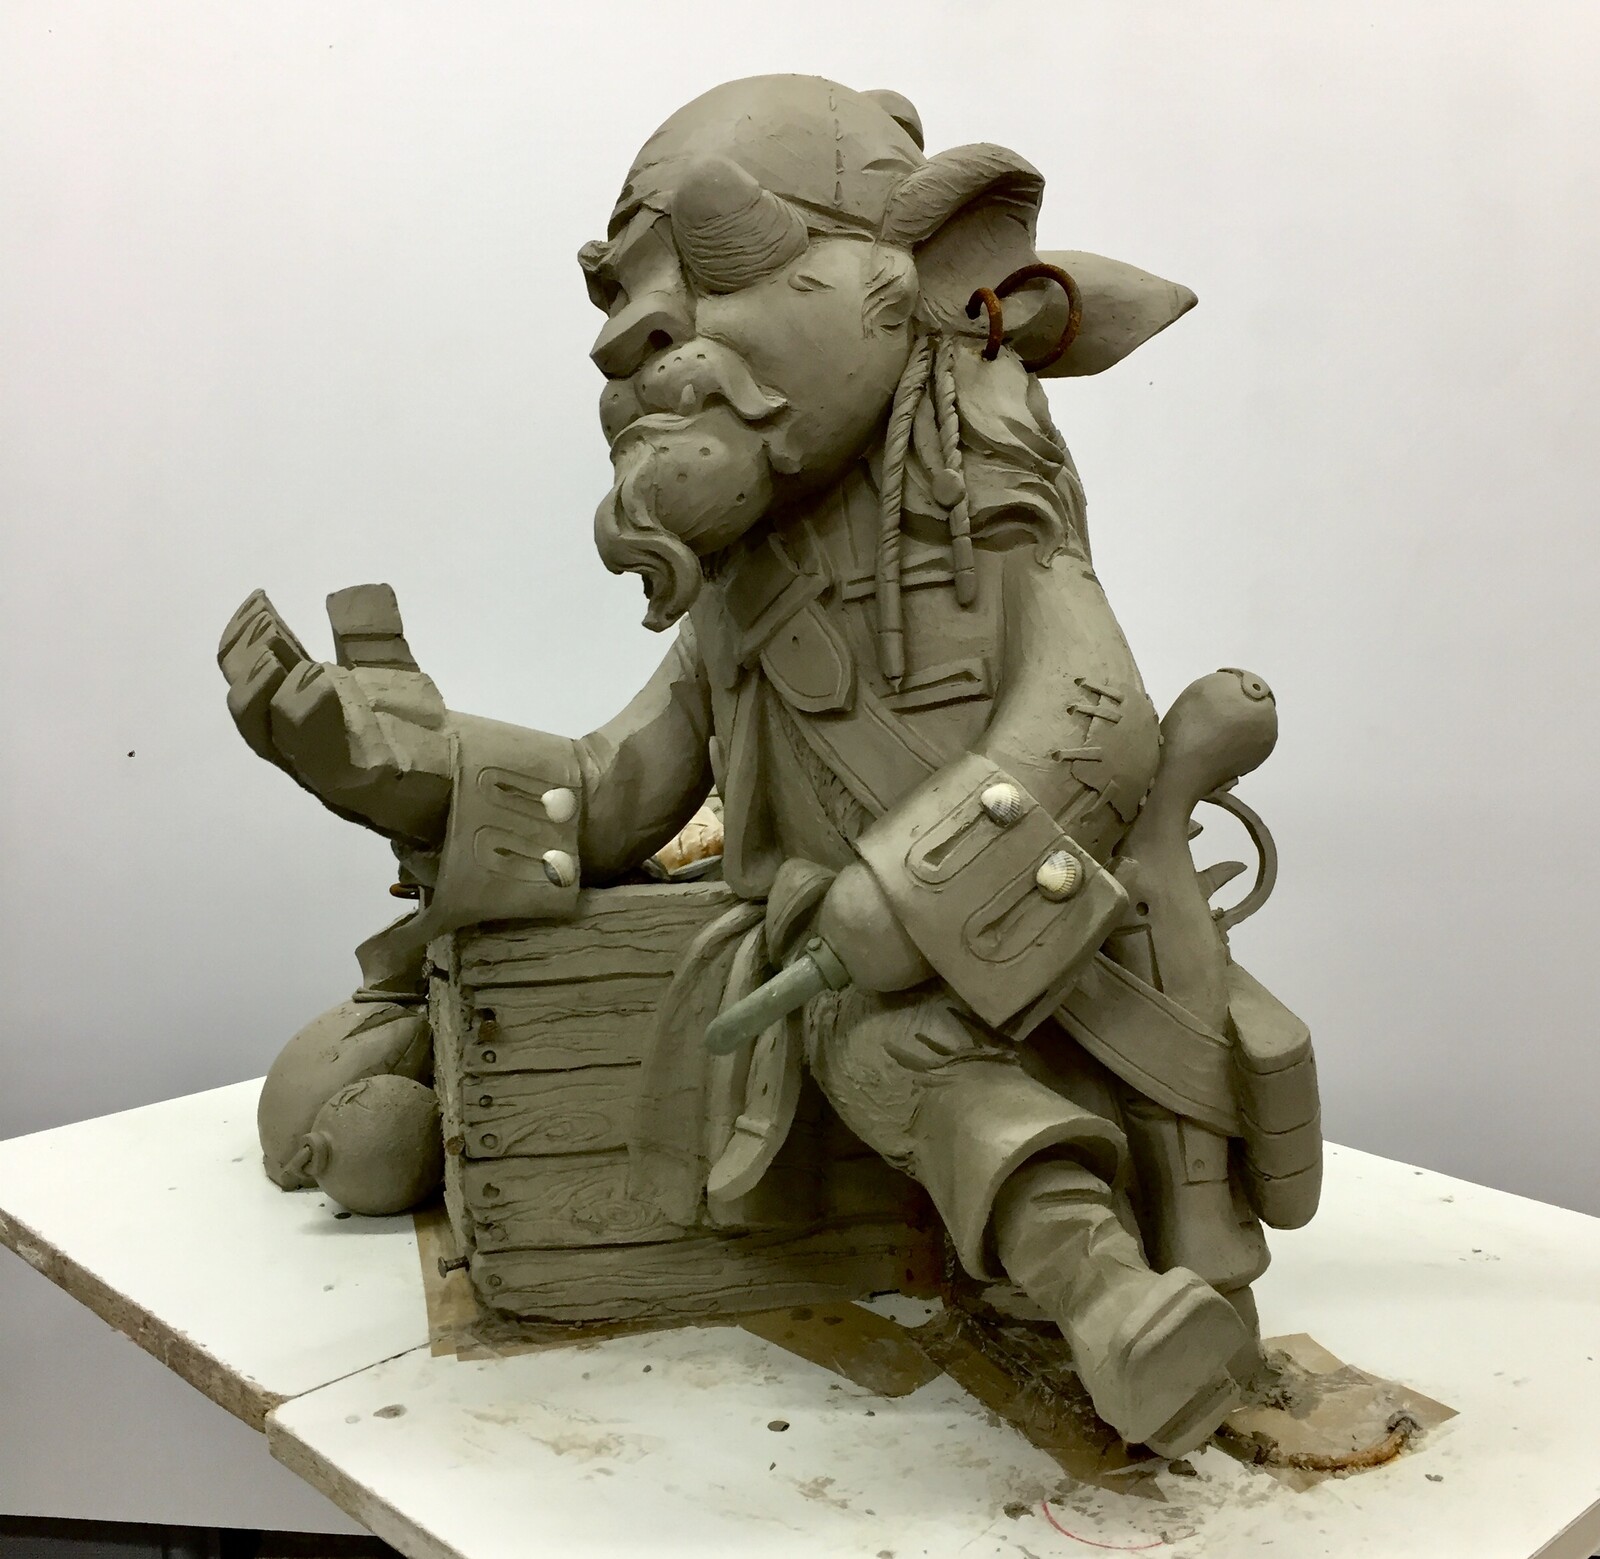 Hewelion clay water sculpture/55cm tall